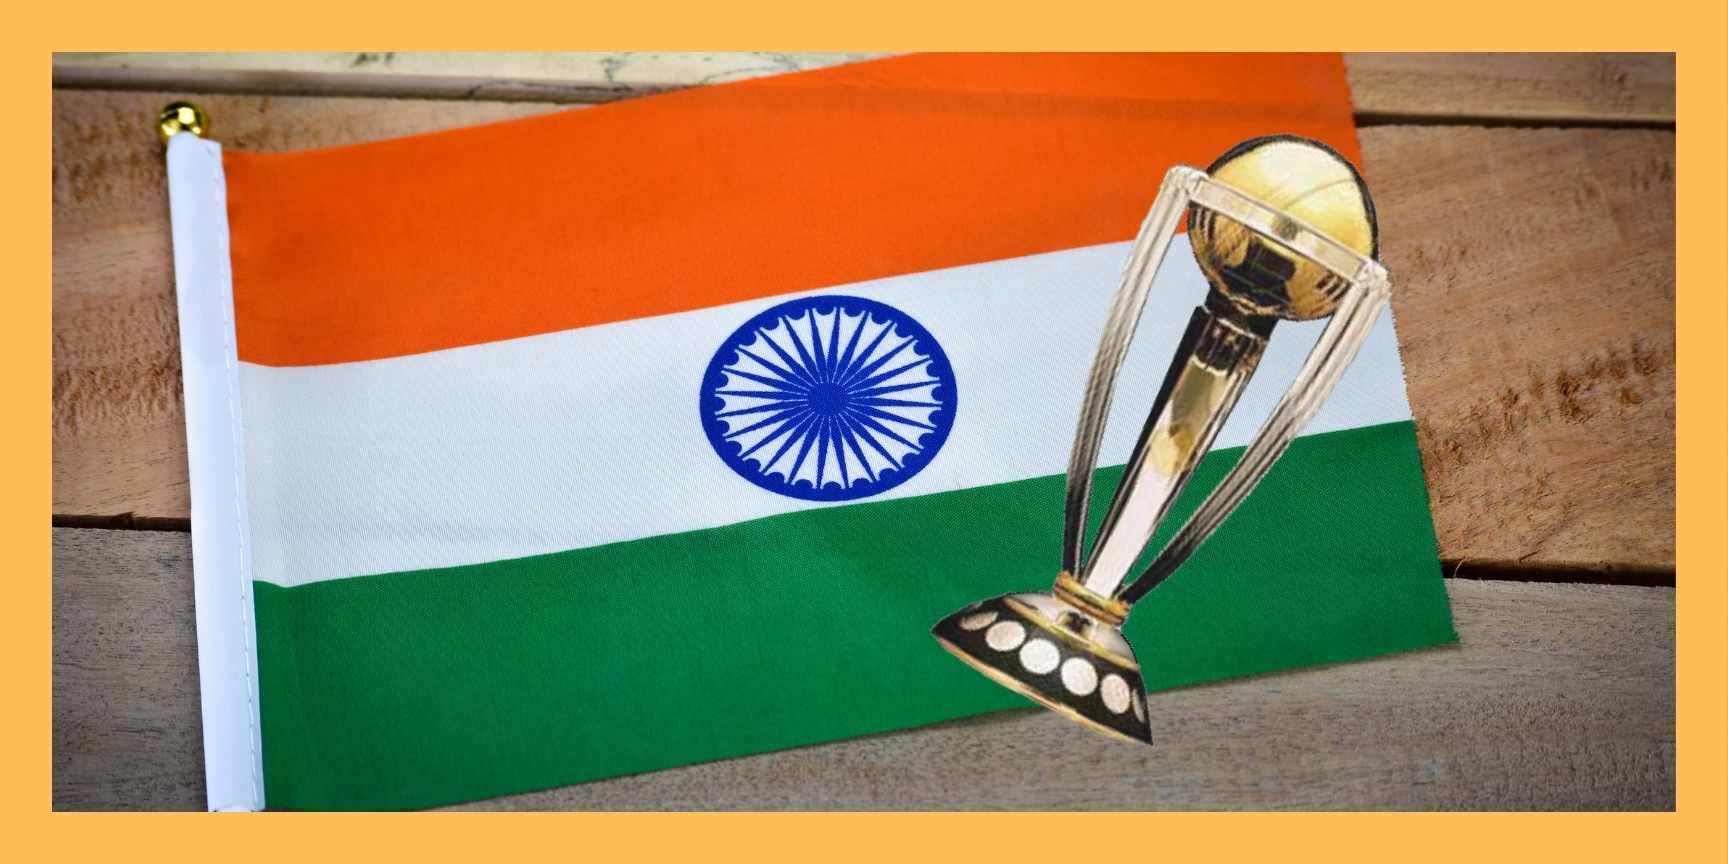 About the types of Cricket World Cups